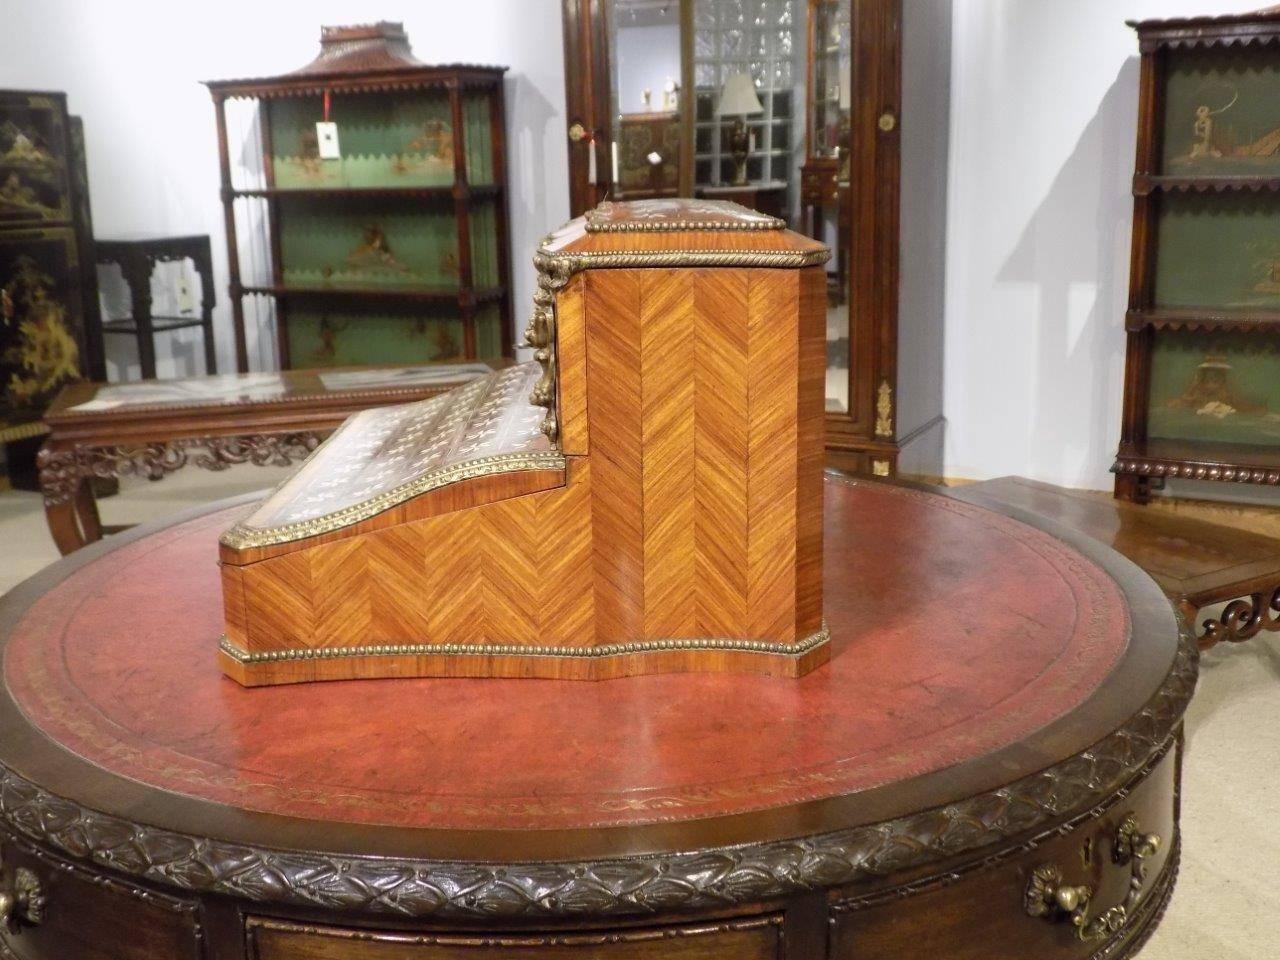 An exhibition quality kingwood and tulipwood parquetry inlaid French writing box constructed using the finest kingwood and tulipwood veneers with herring bone parquetry inlaid panels and finely cast ormolu and mouldings. The hinged top section